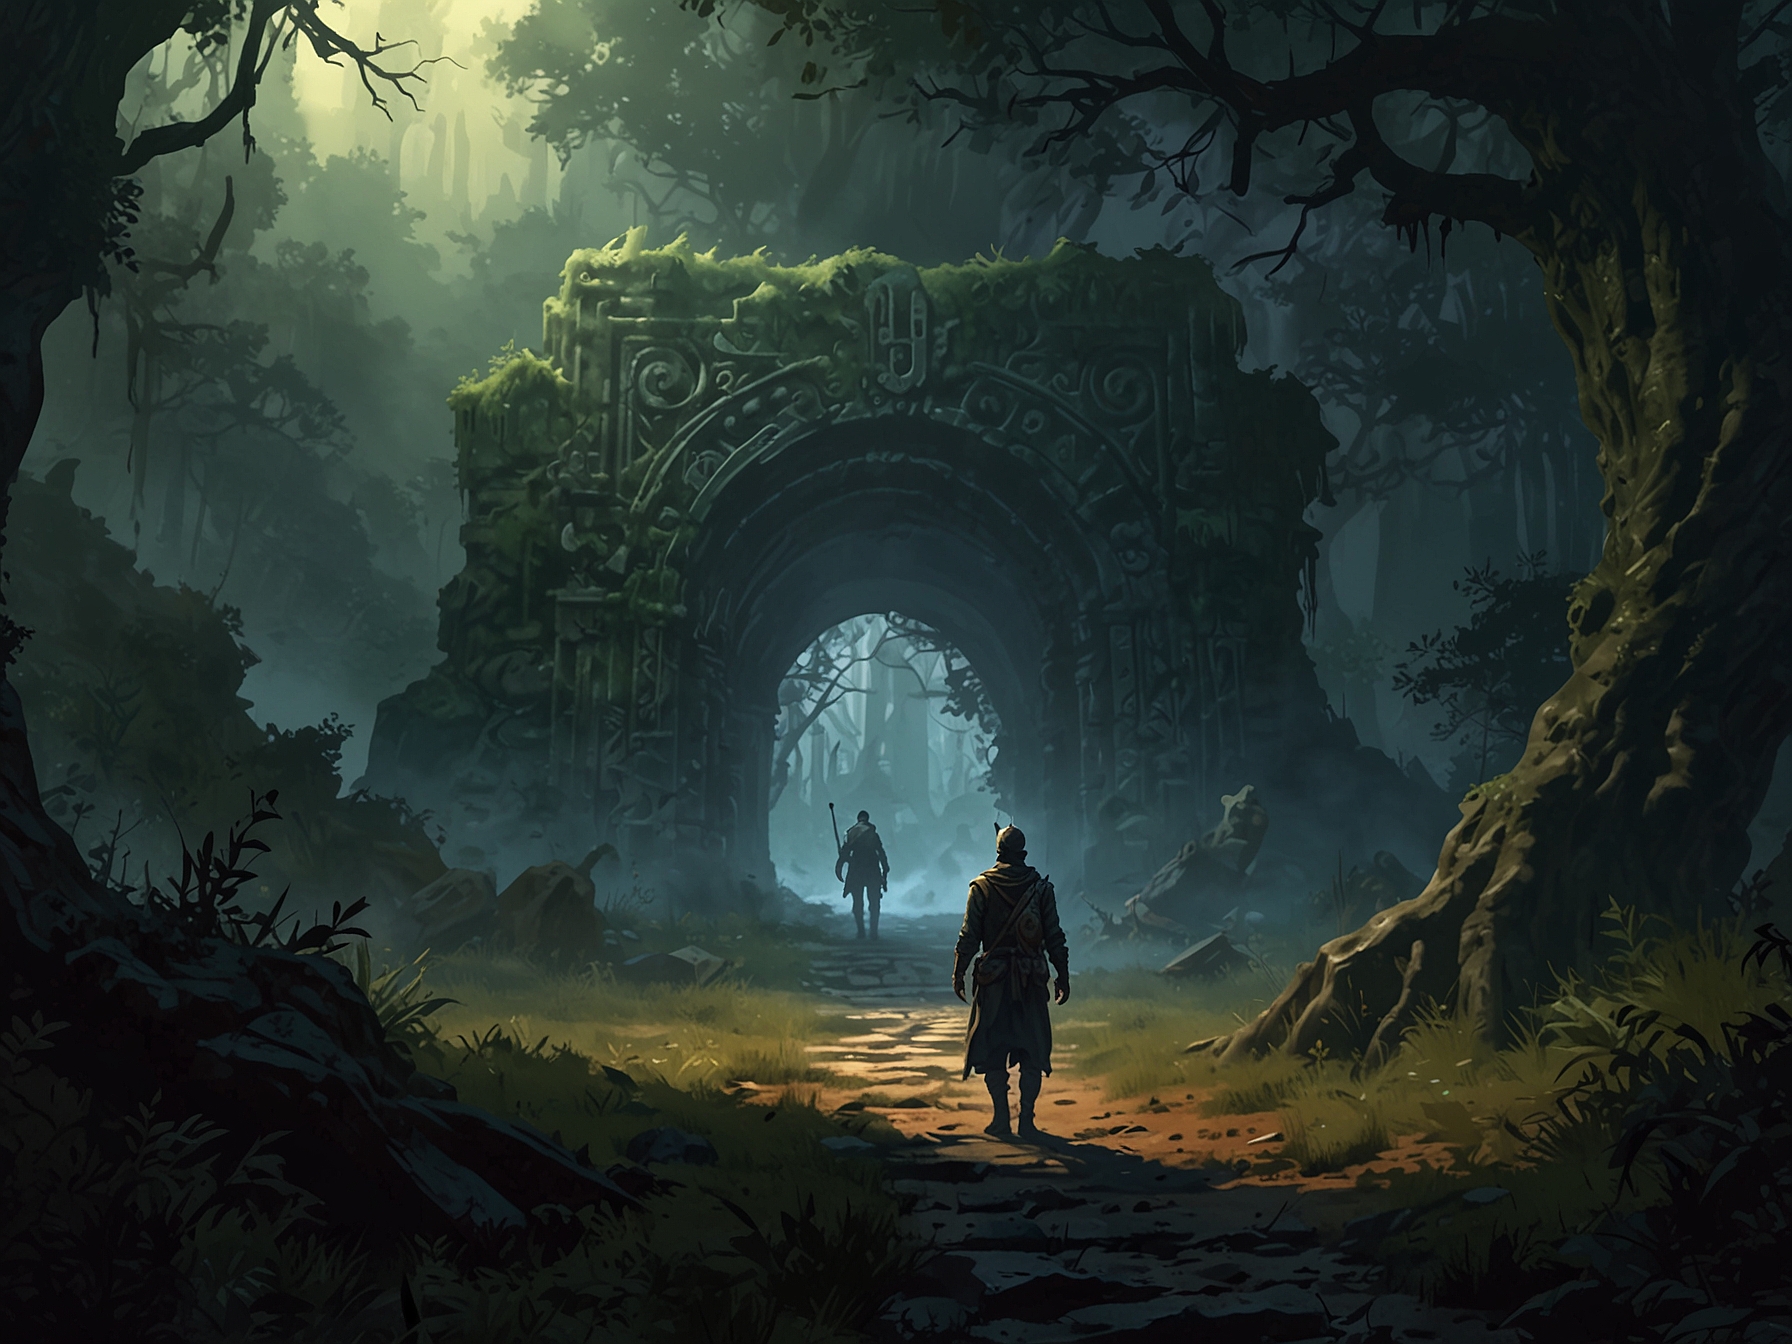 An adventurer stands at the entrance of the labyrinthine forest in the Festering Plains, the hidden path leading to the formidable Crypts of Malediction, shrouded in an eerie mist.